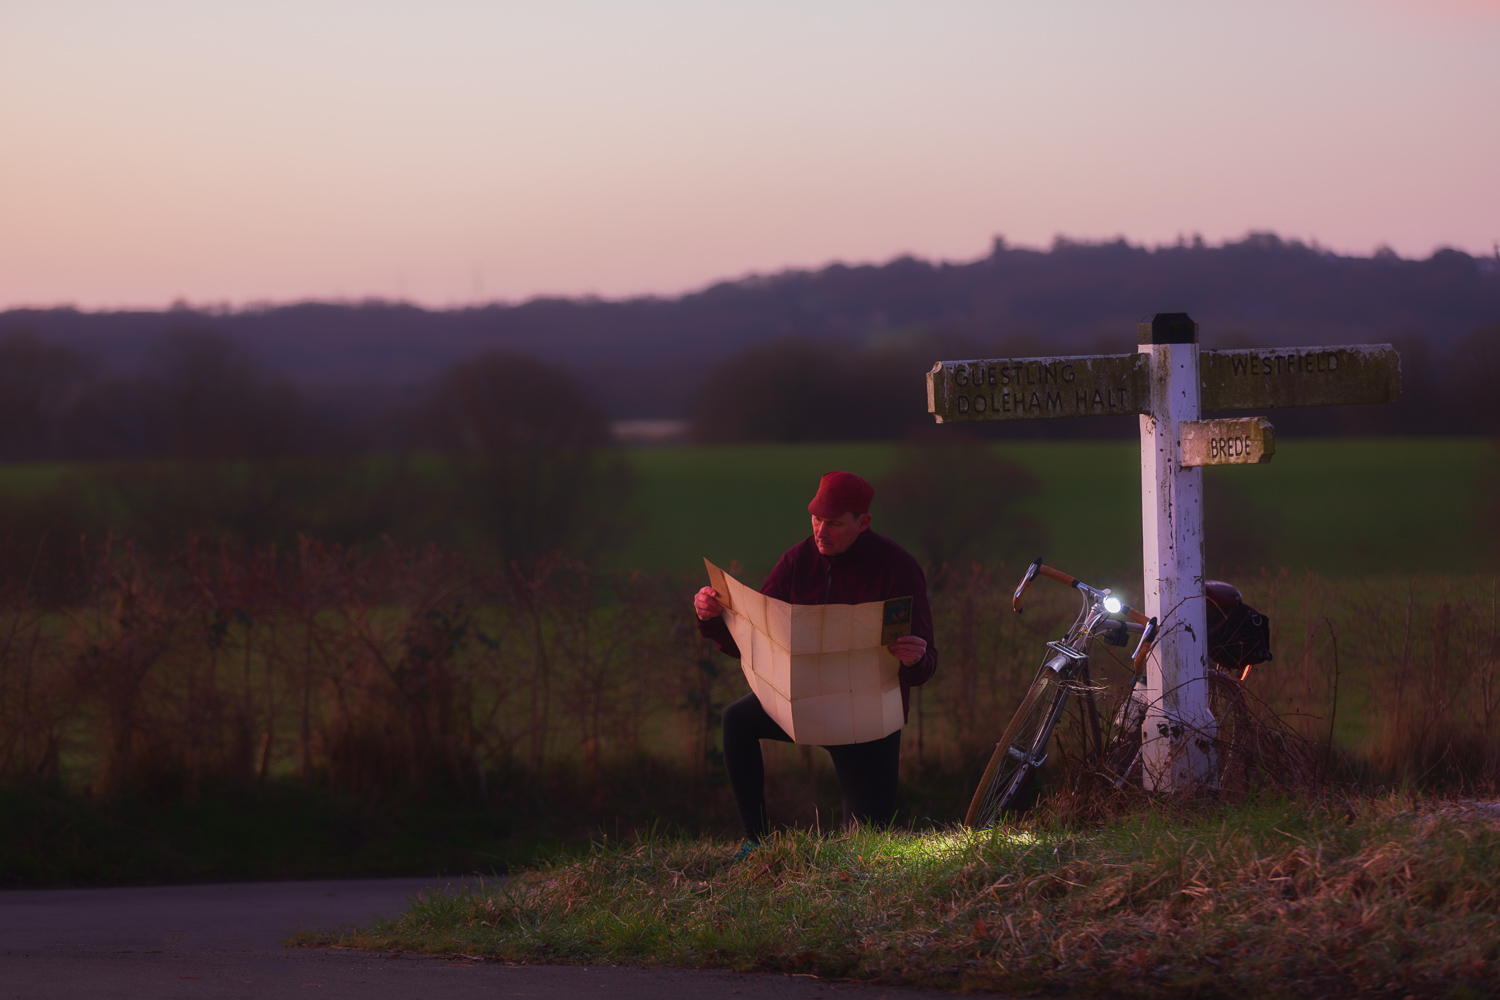 Cyclist reading a map by lamplight beside an old wooden signpost